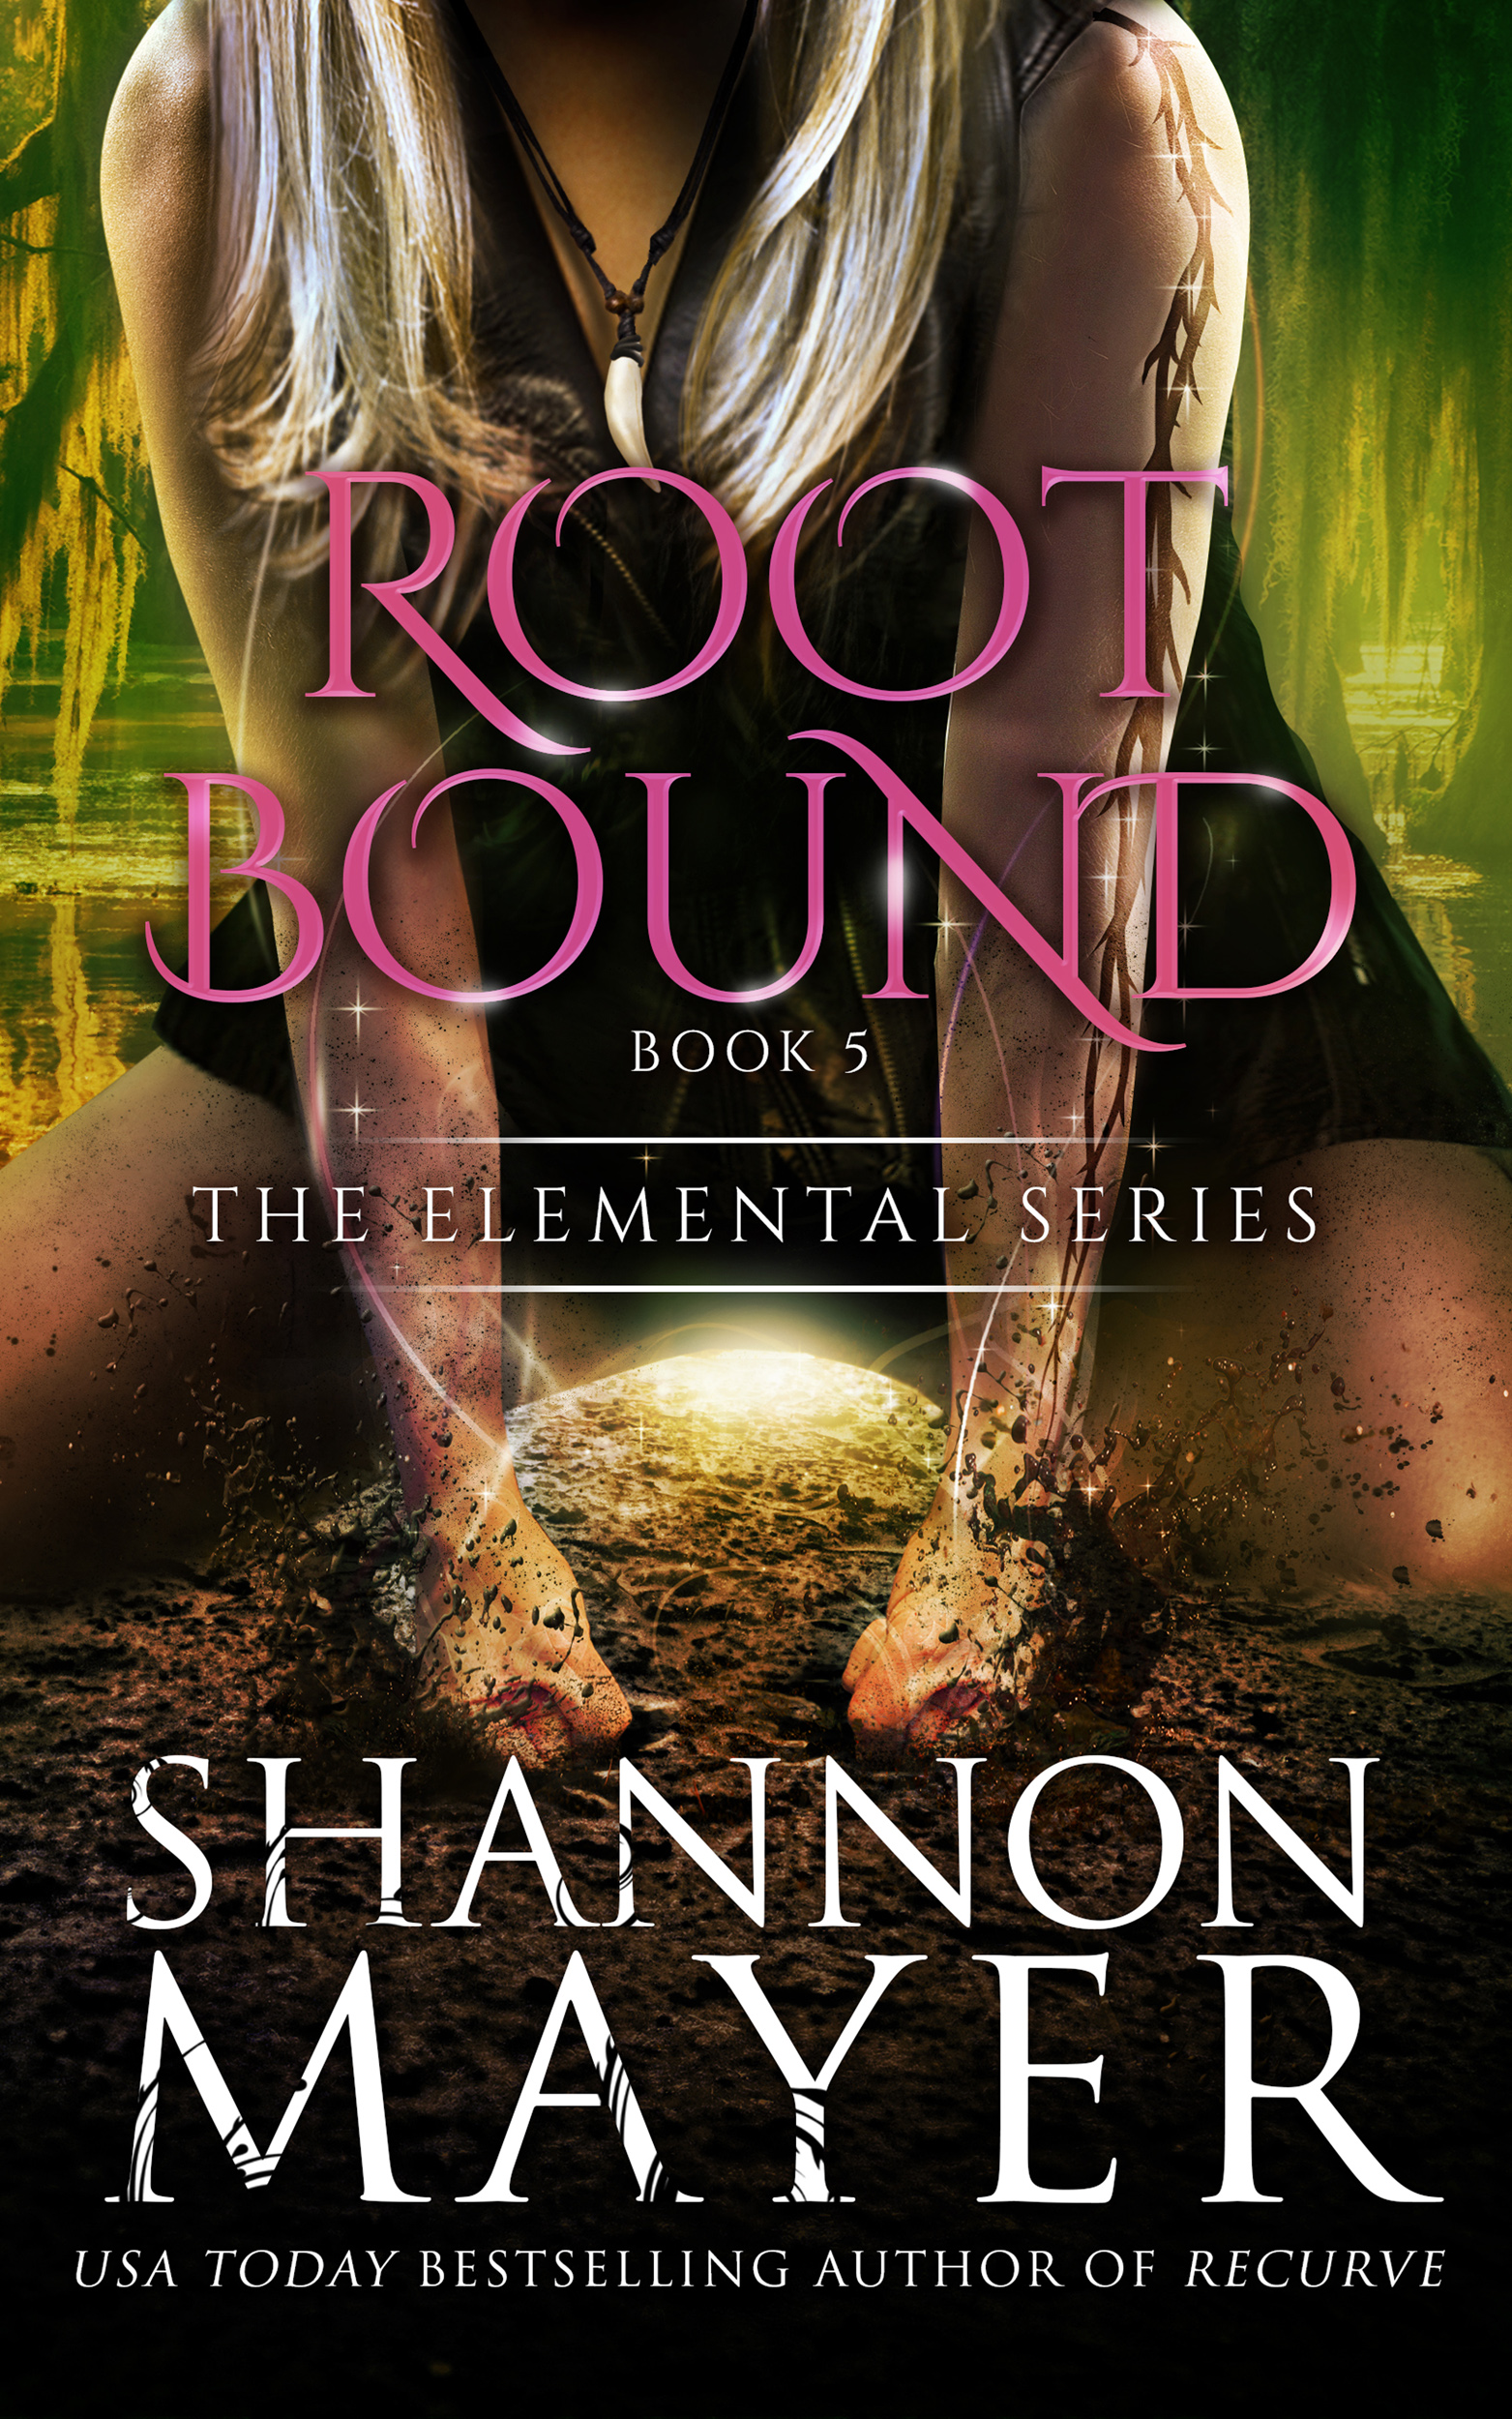 Rootbound (The Elemental Series, Book 5) (2016) by Shannon Mayer